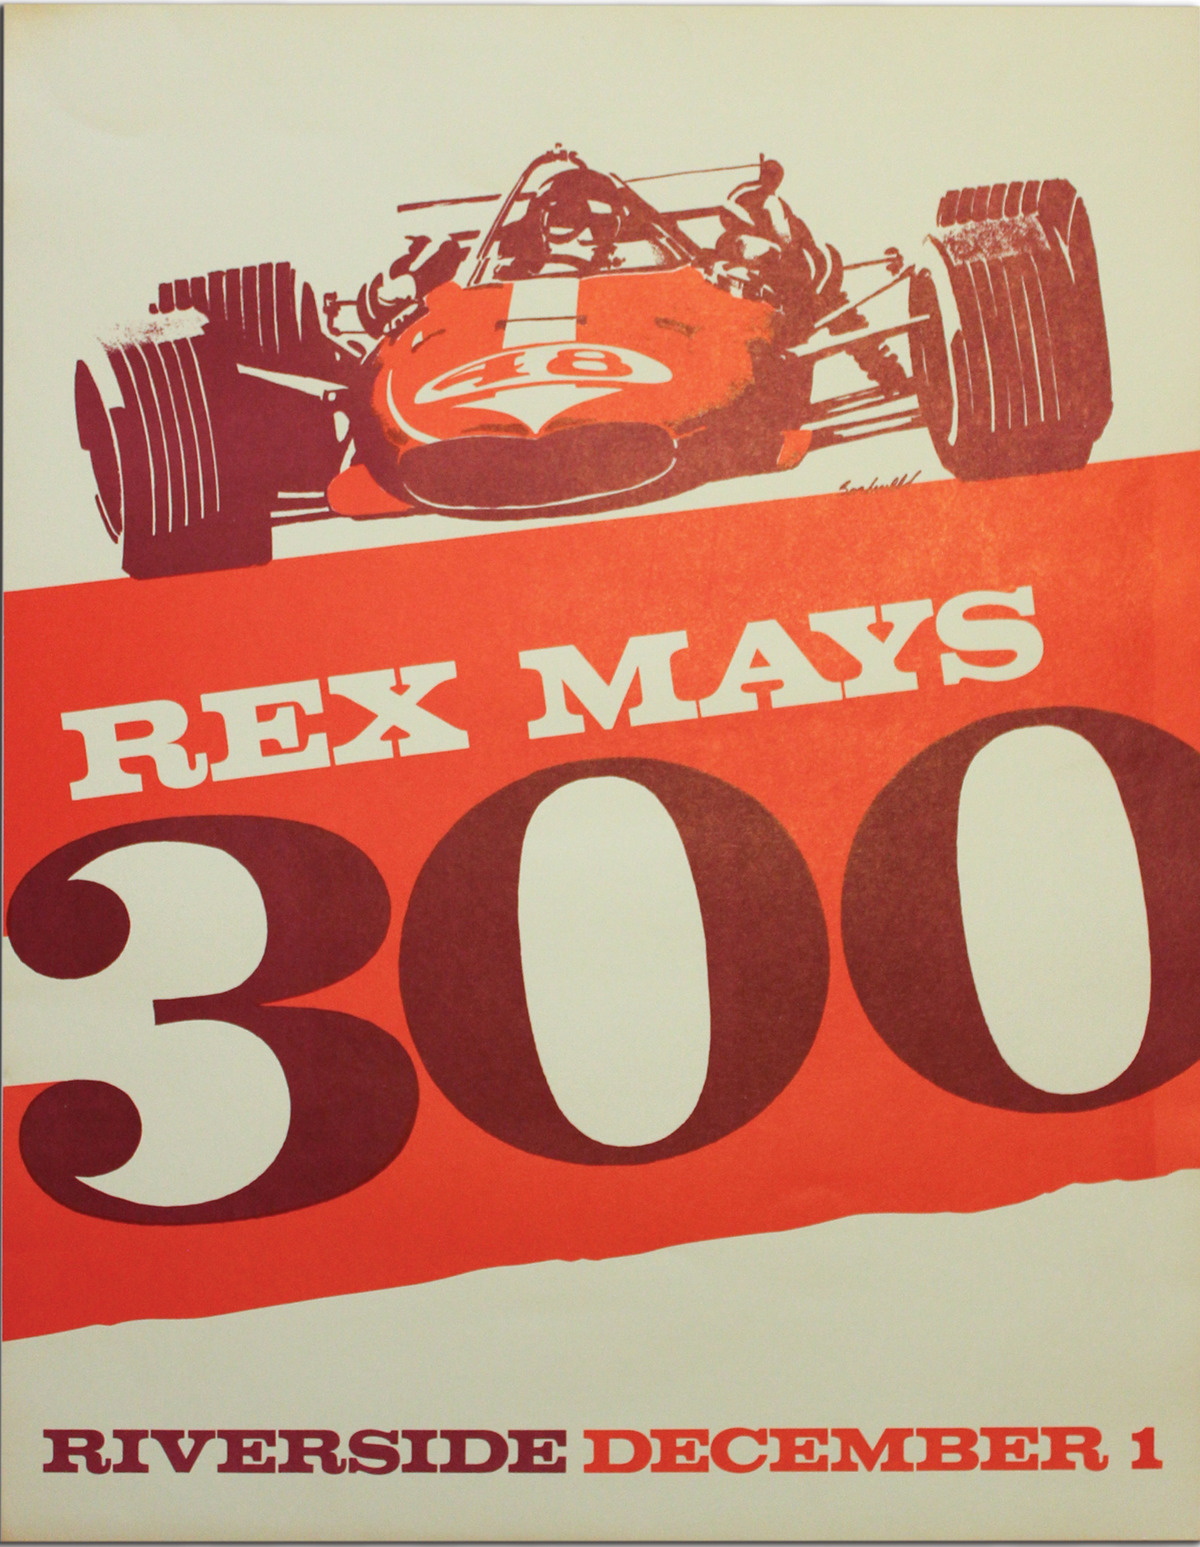 Rex Mays 300 Riverside December 1 Vintage Event Poster 1967 offered in RM Sotheby's The Art of Competition auction 2020